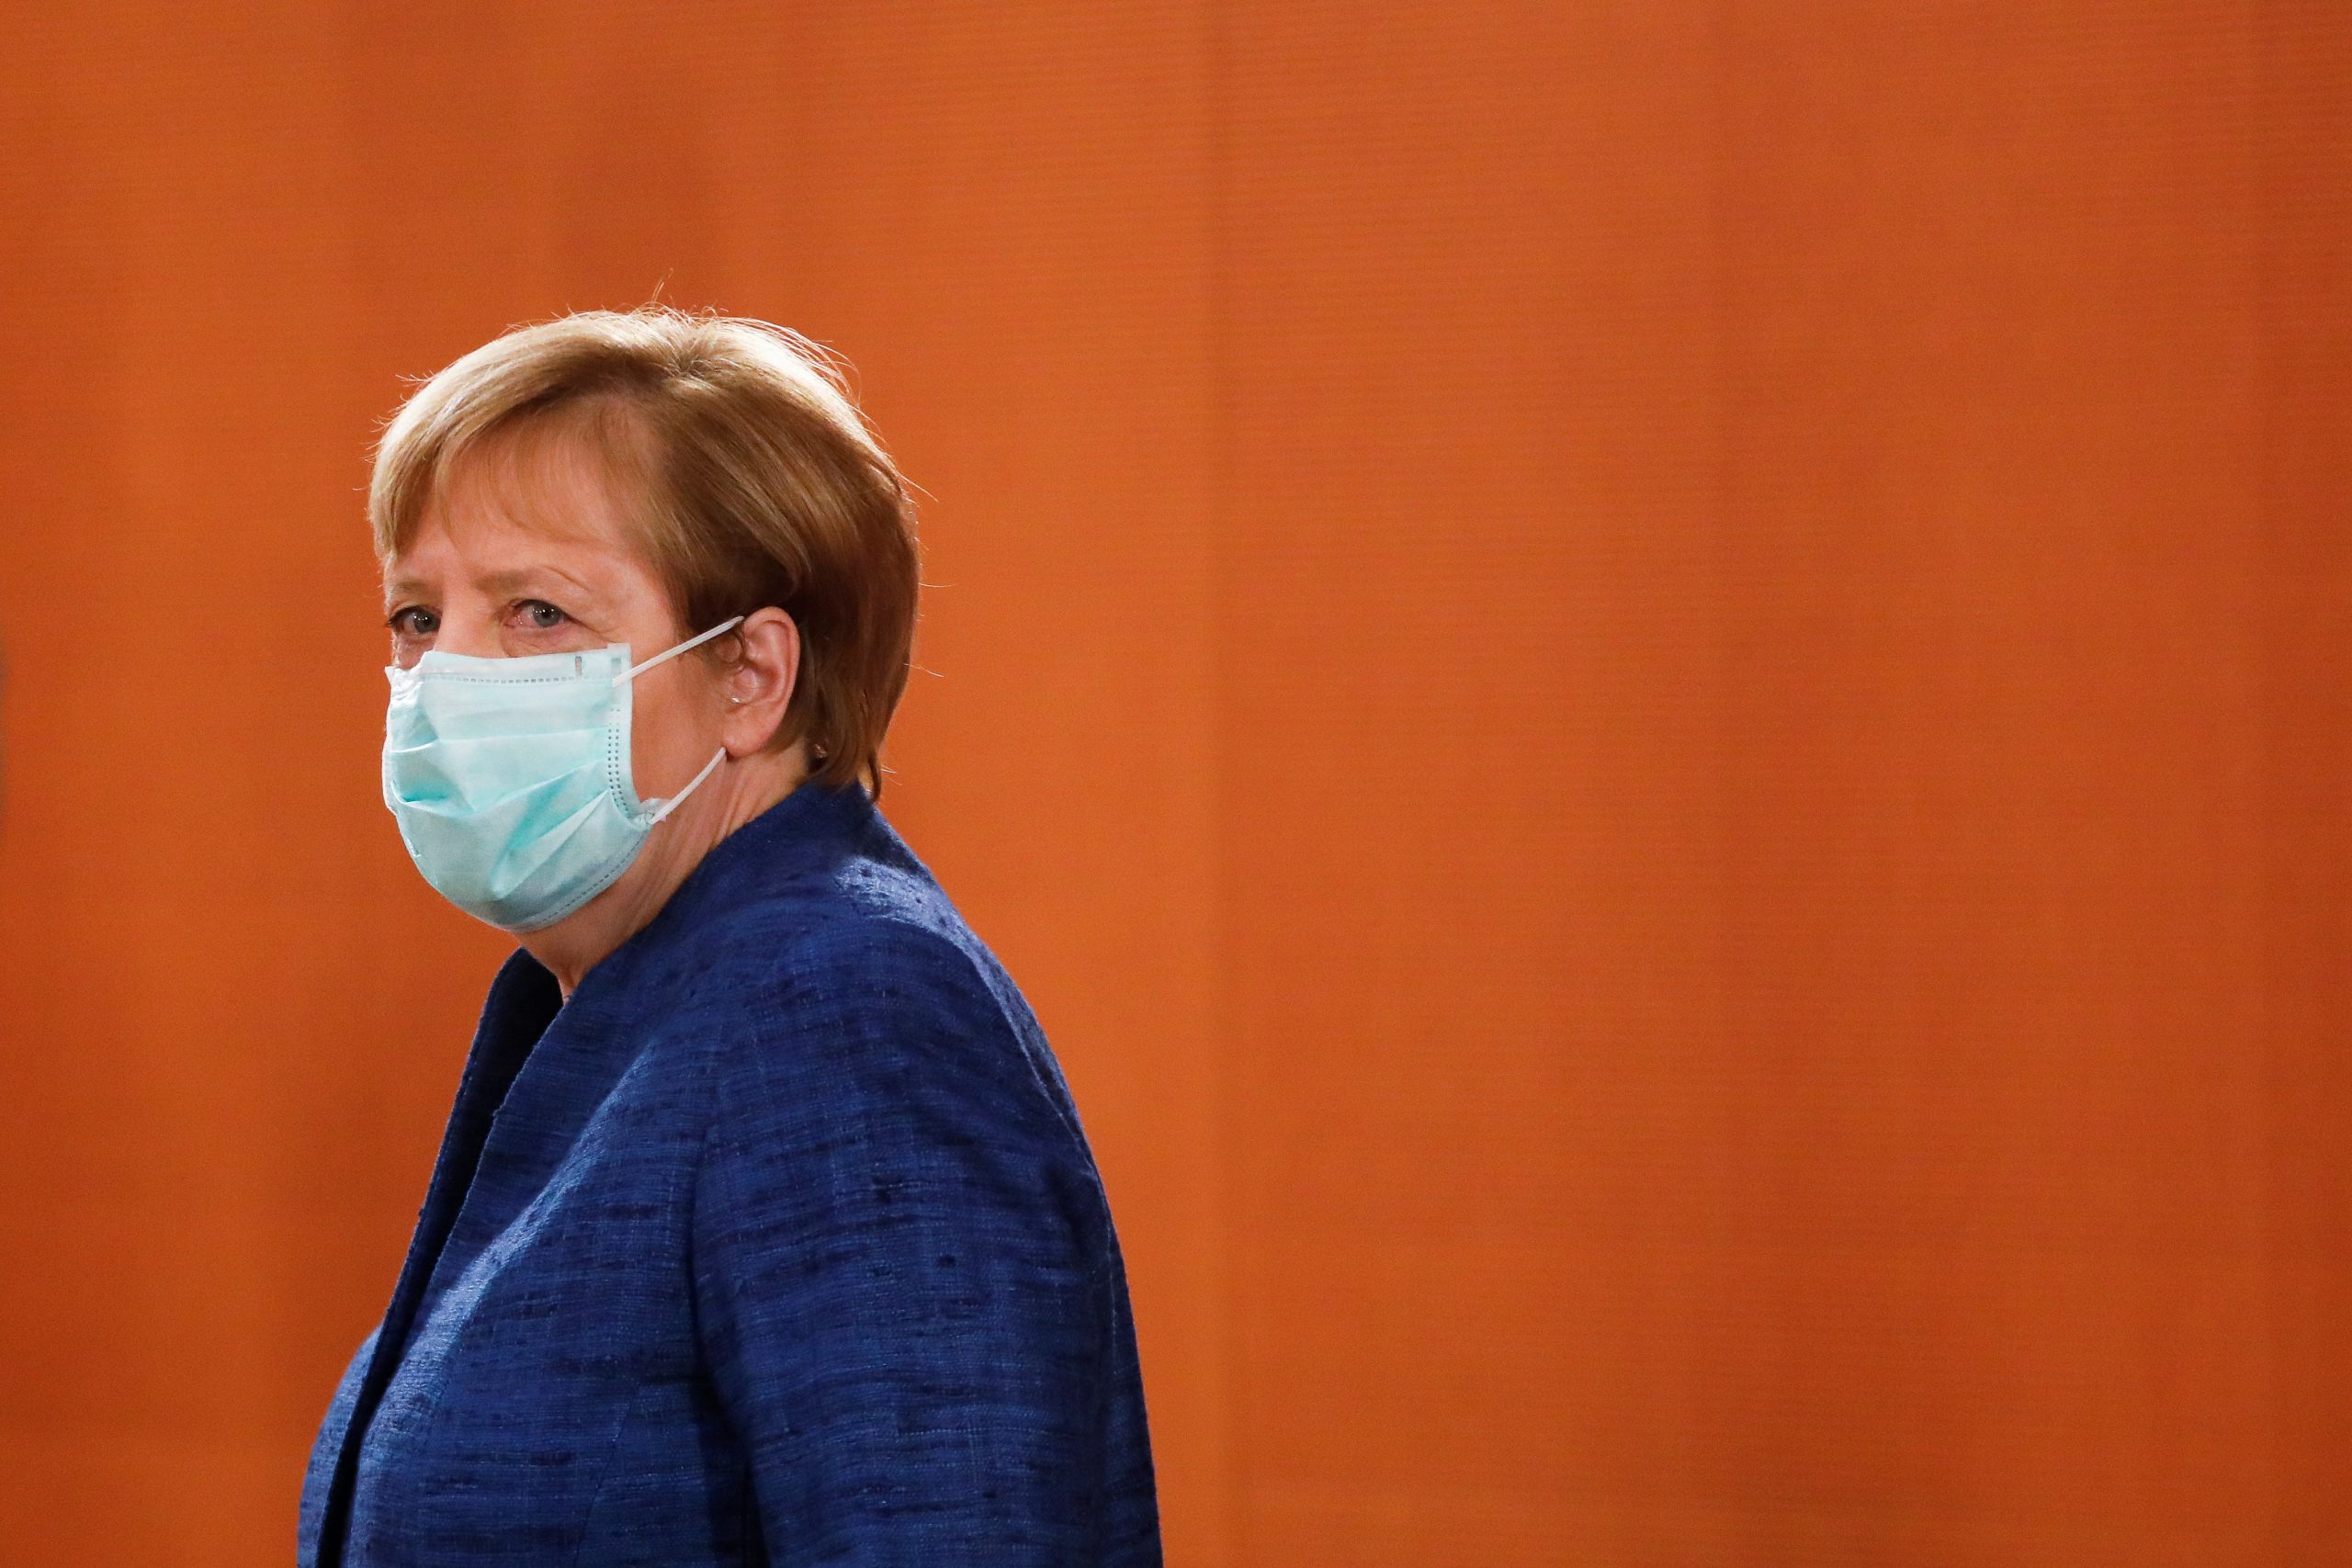 Weekly cabinet meeting of the German government at the chancellery in Berlin German Chancellor Angela Merkel attends the weekly cabinet meeting of the German government at the Chancellery in Berlin, Germany October 7, 2020. Markus Schreiber/Pool via REUTERS POOL